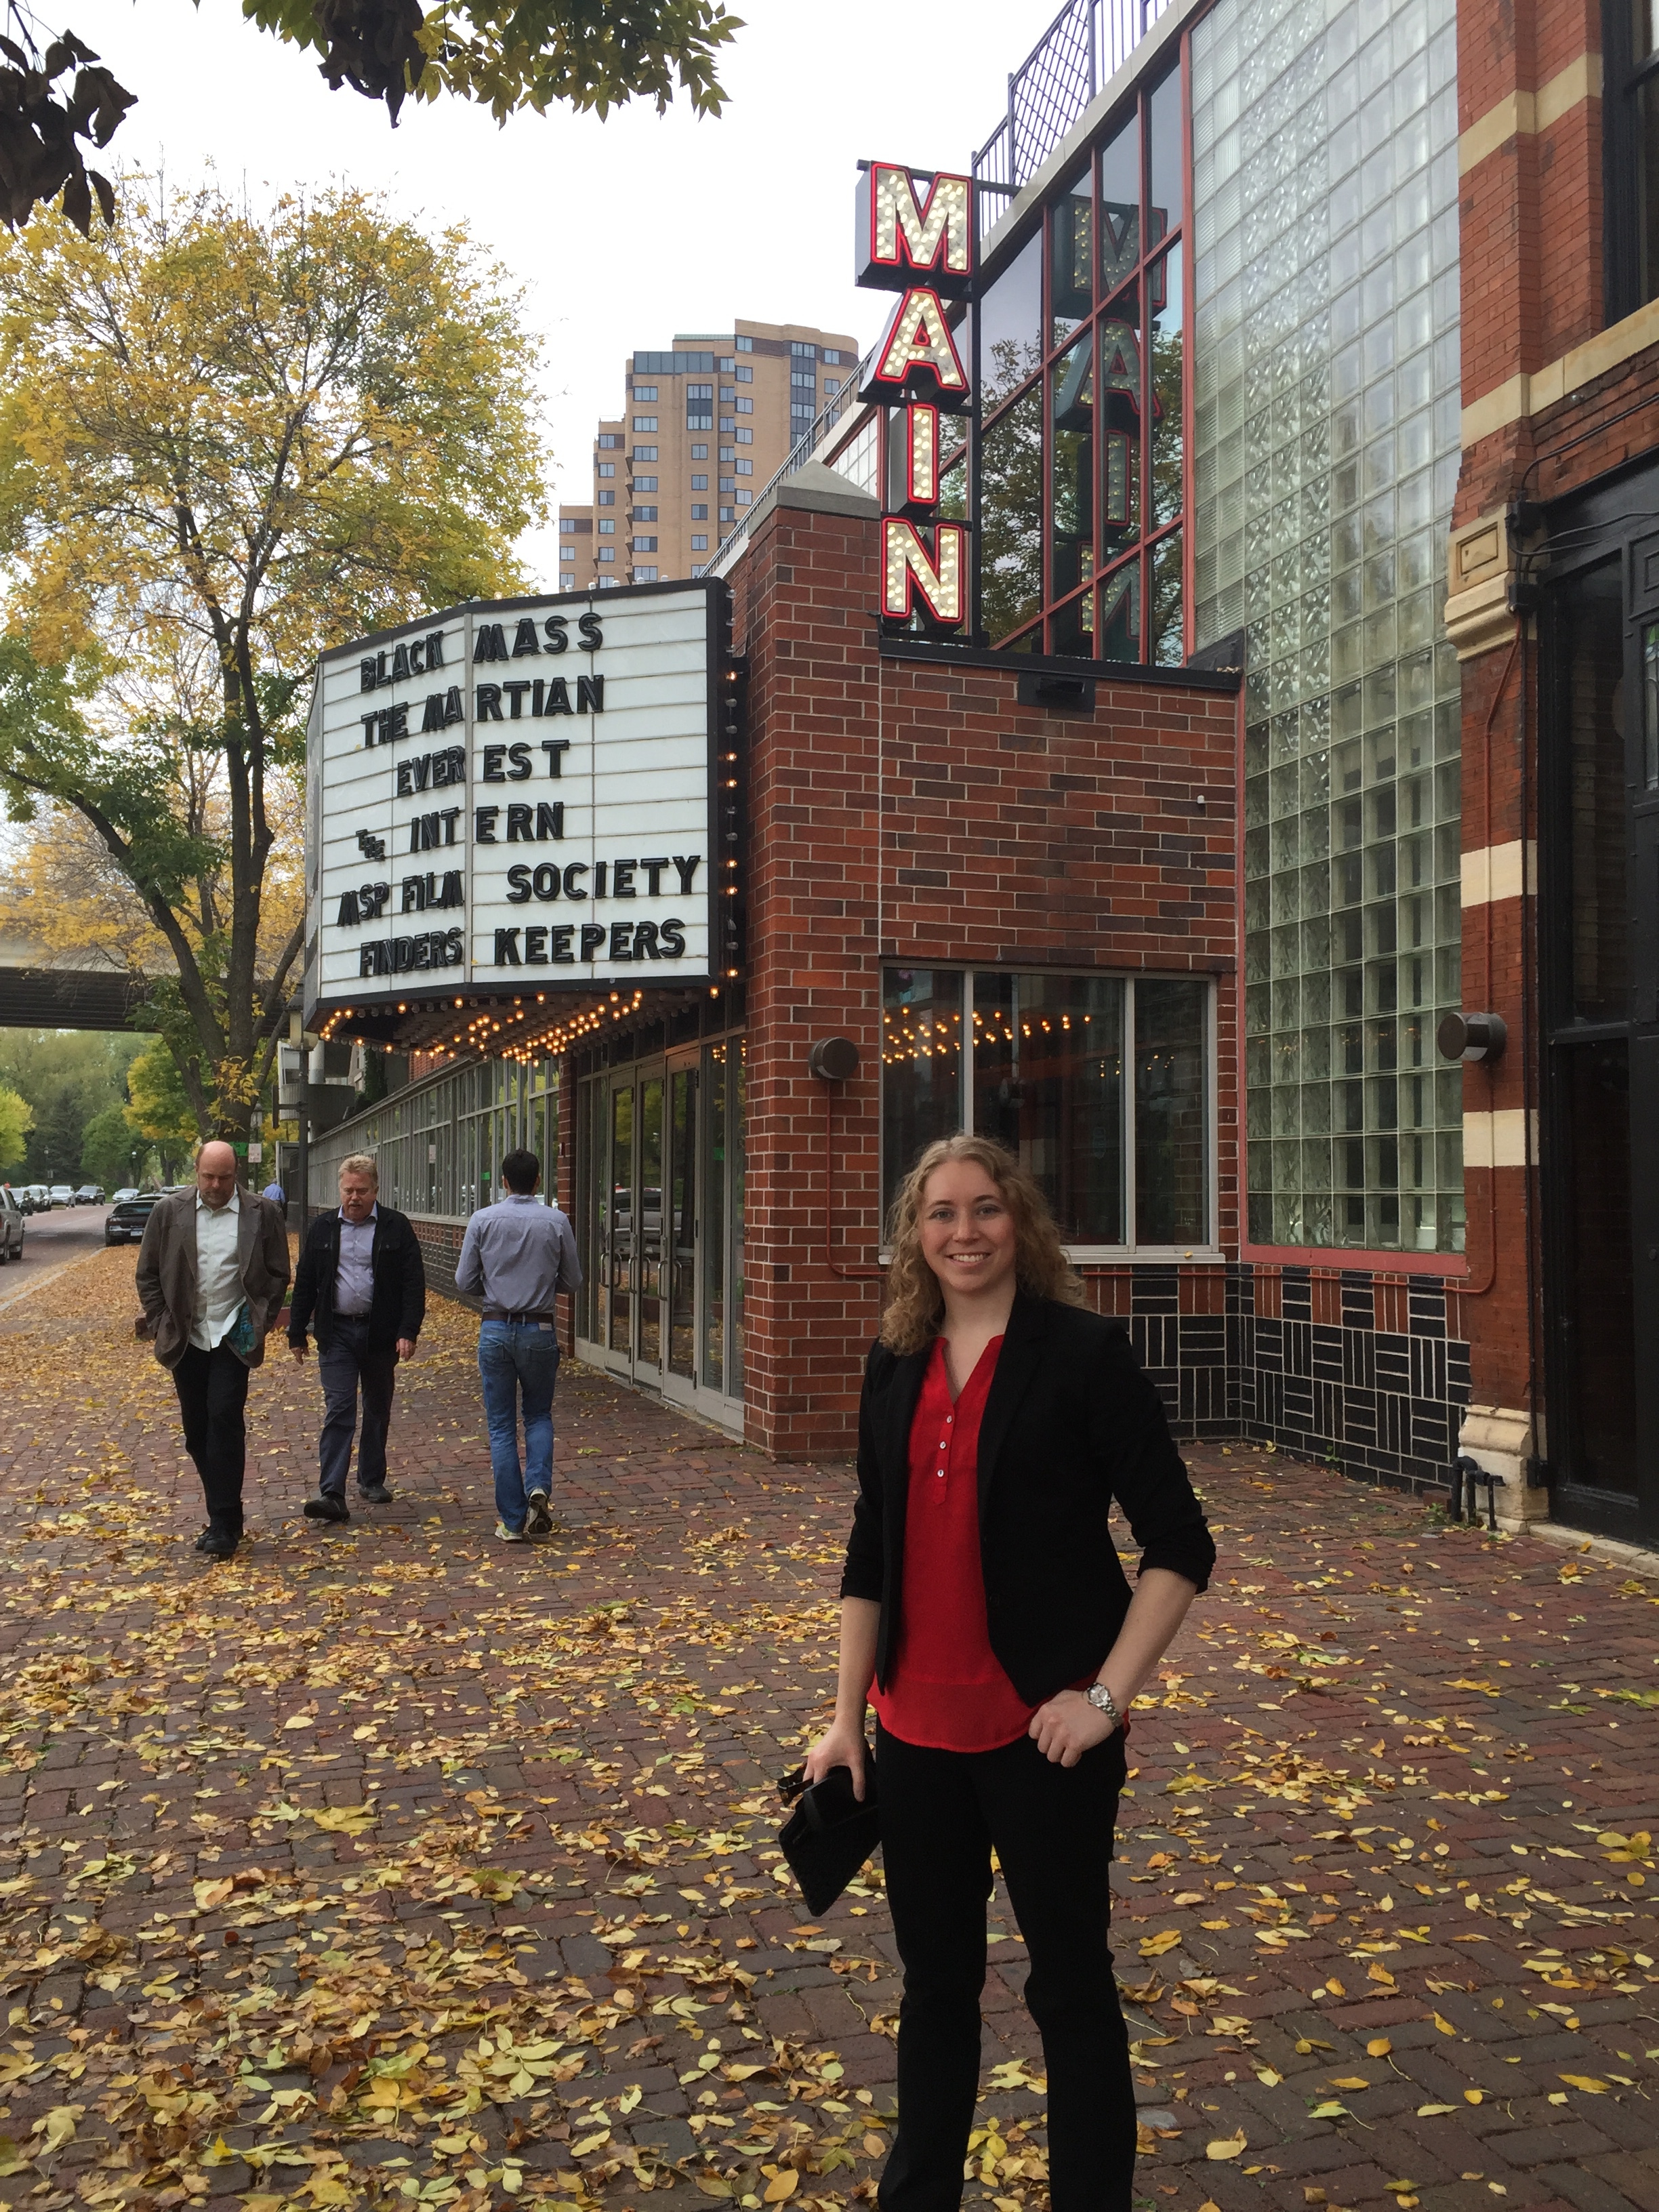 Lauren Barker in front of the historic St. Anthony Main Theatre in Minneapolis, MN, for the Minneapolis Underground Film Festival 8 October 2015.